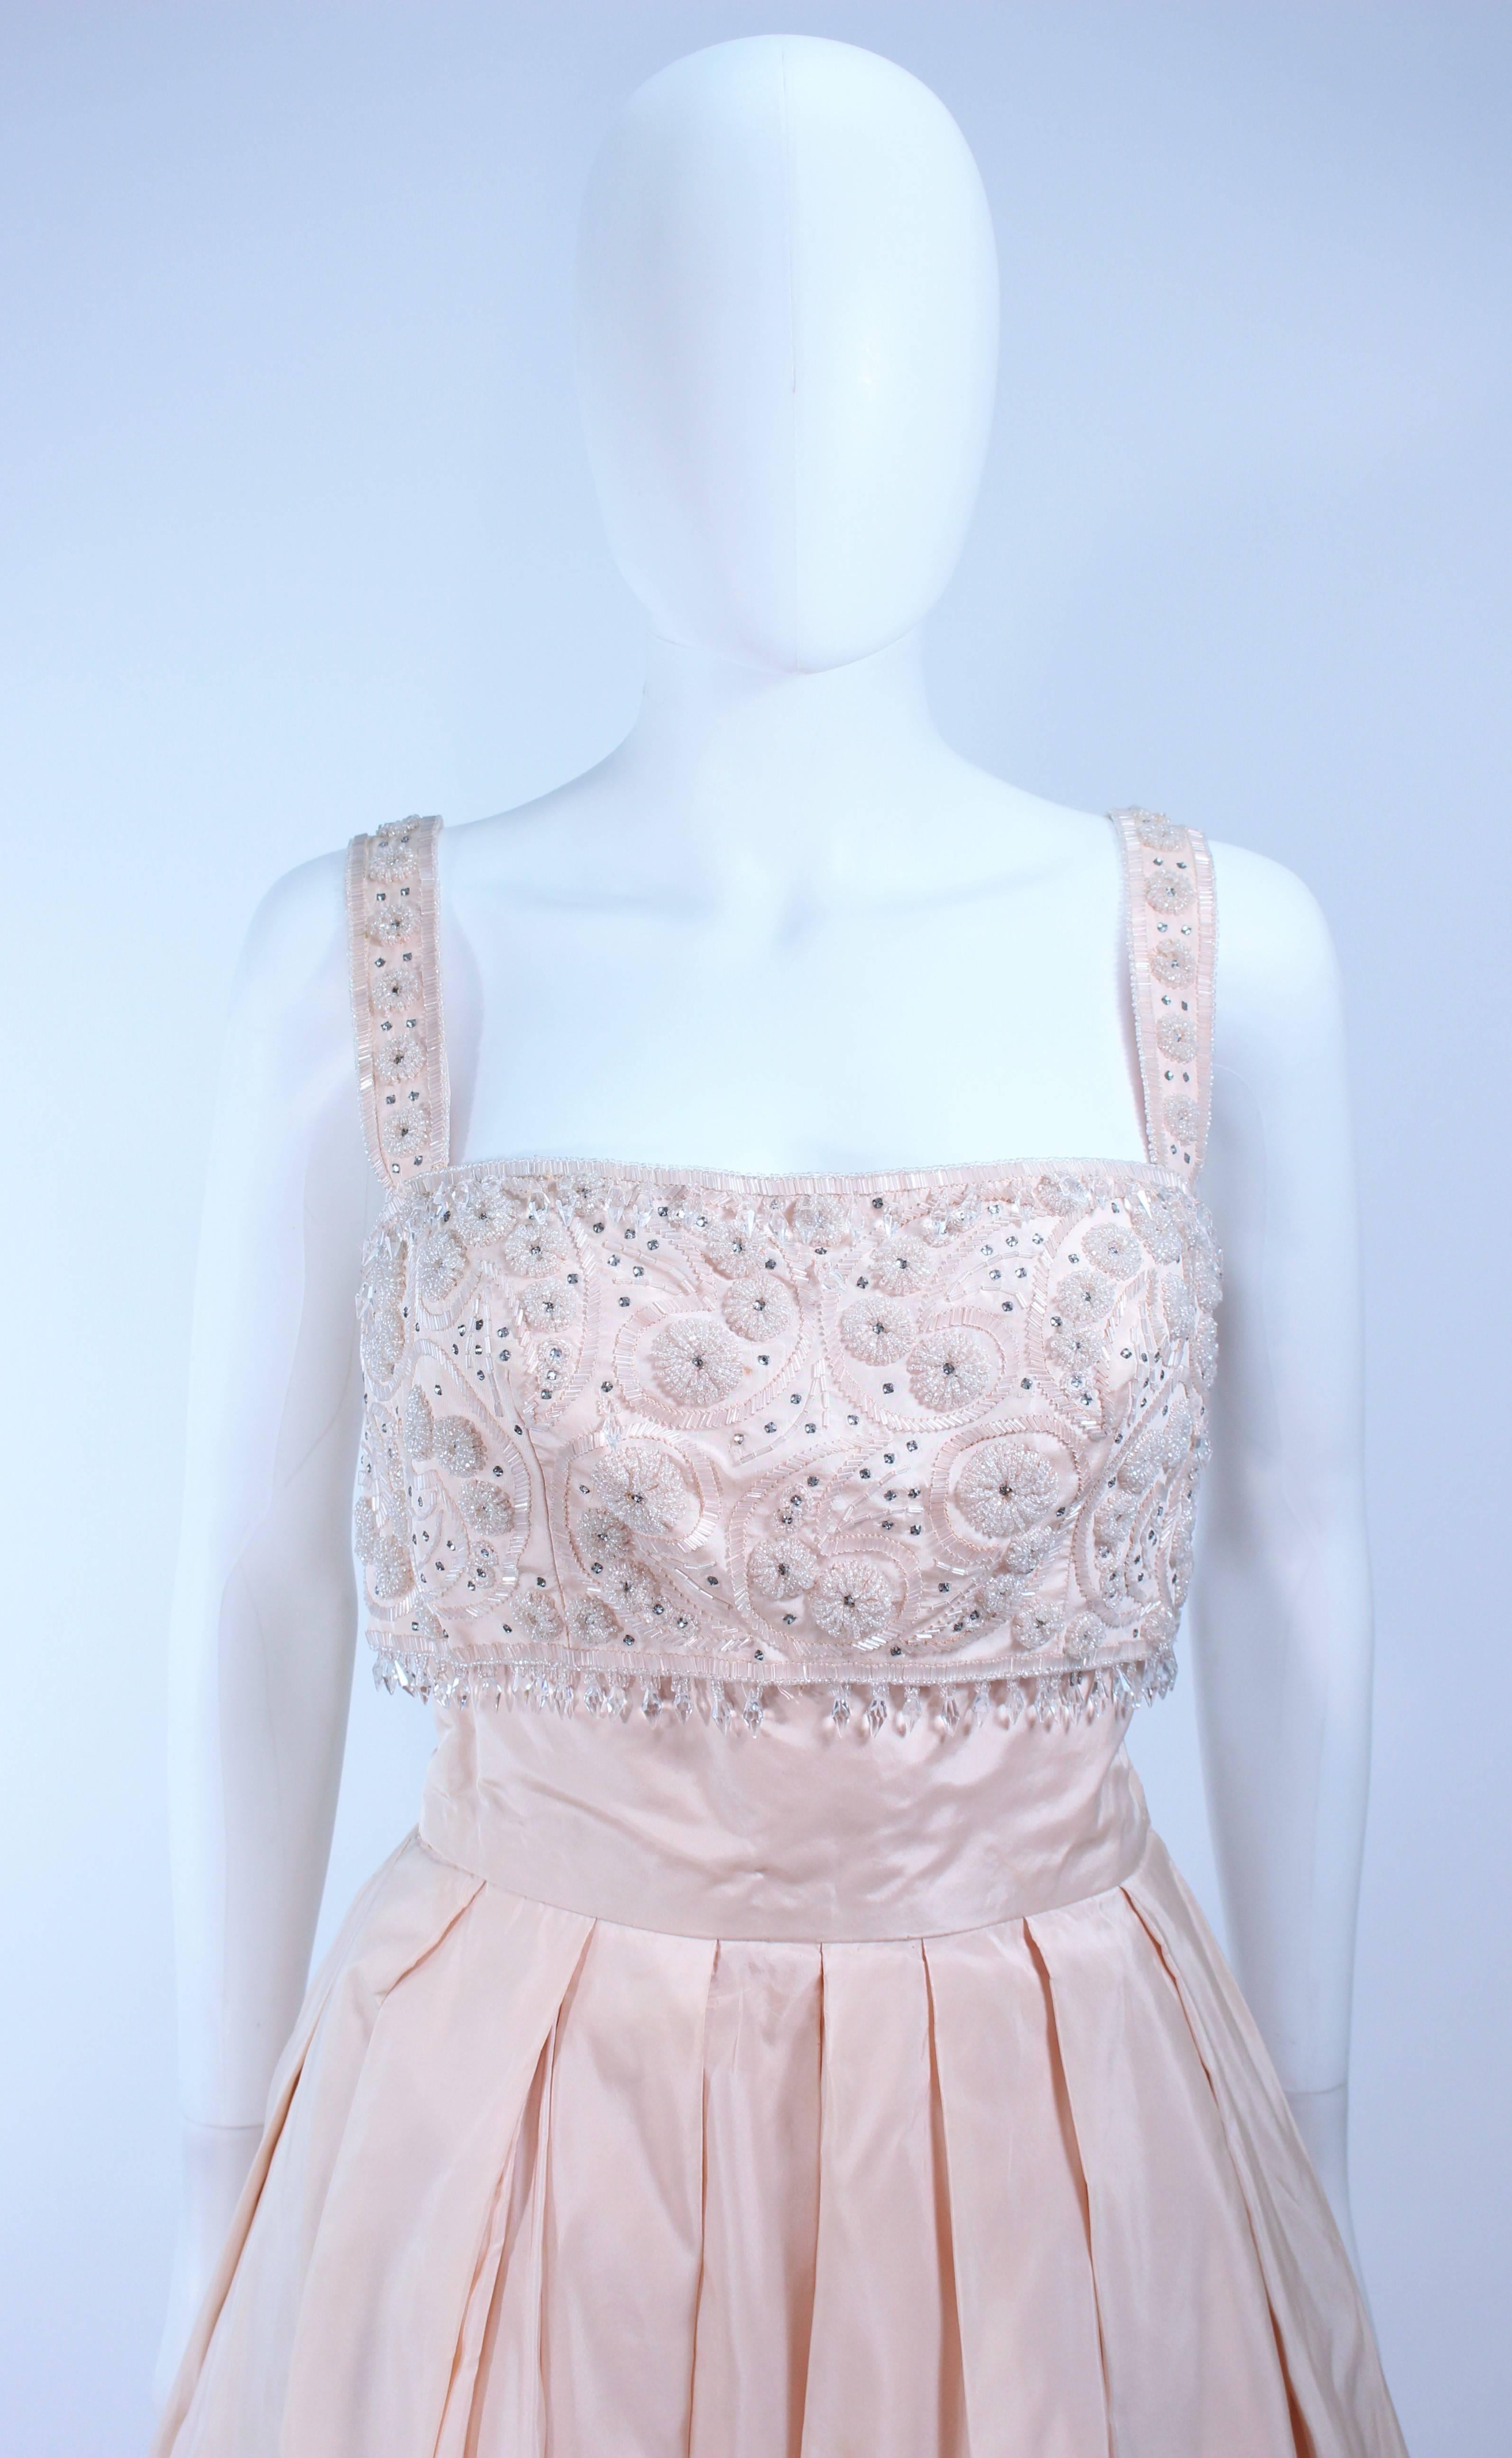 Gray EDITH HEYMAN 1950's Pink Silk Cocktail Embellished Dress Size 4 For Sale